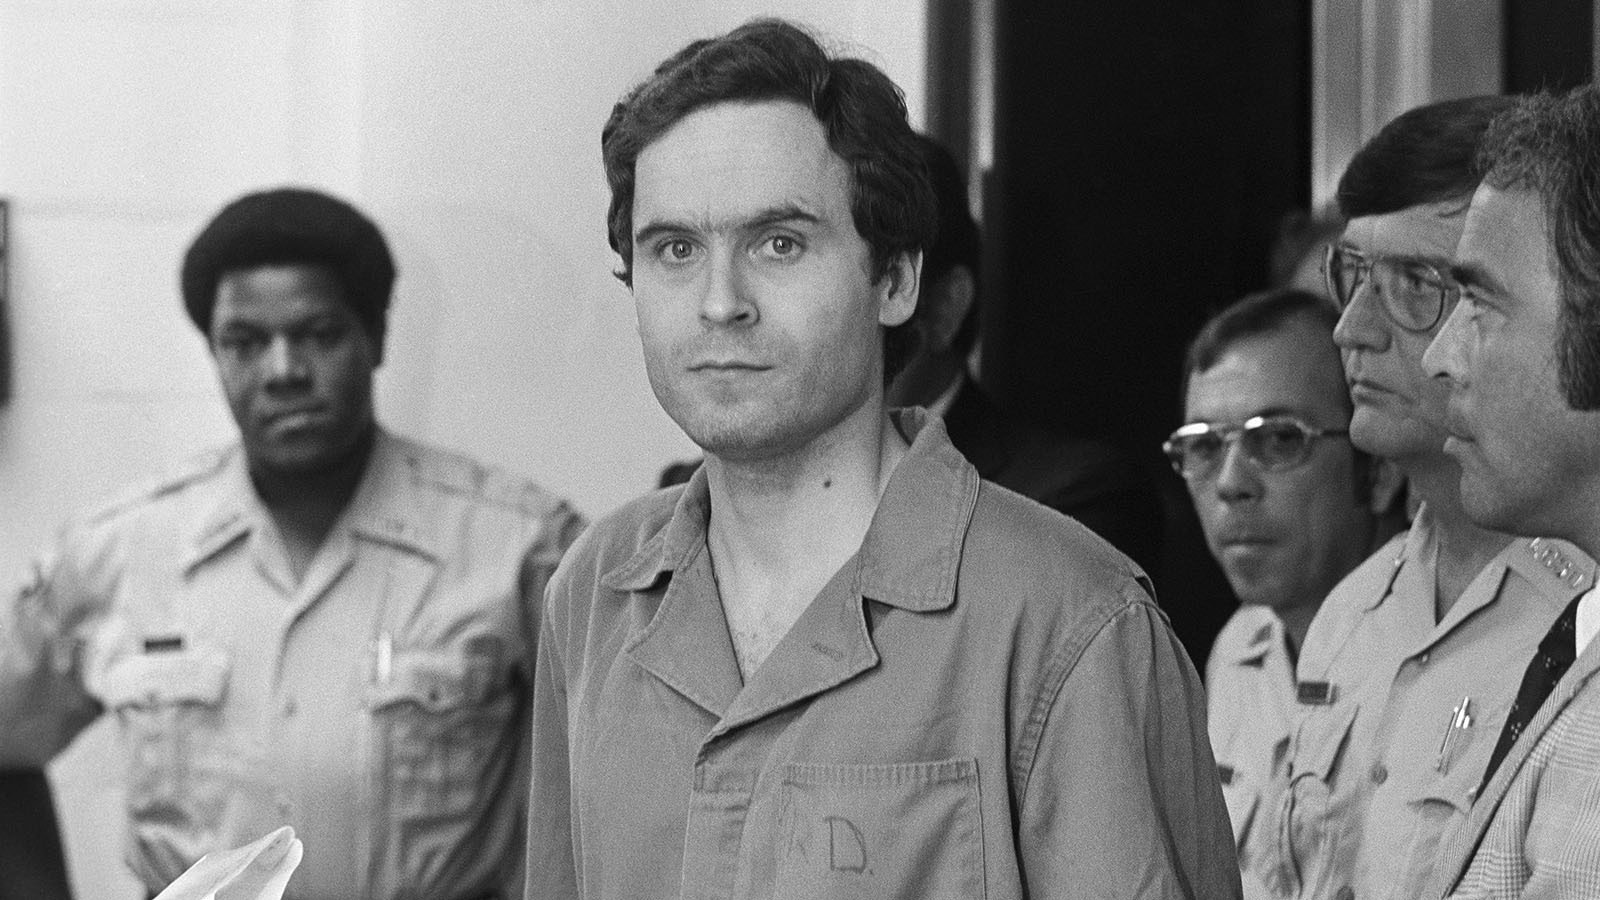 Serial killer Ted Bundy after he was arrested for the murder of two Florida State University co-eds.